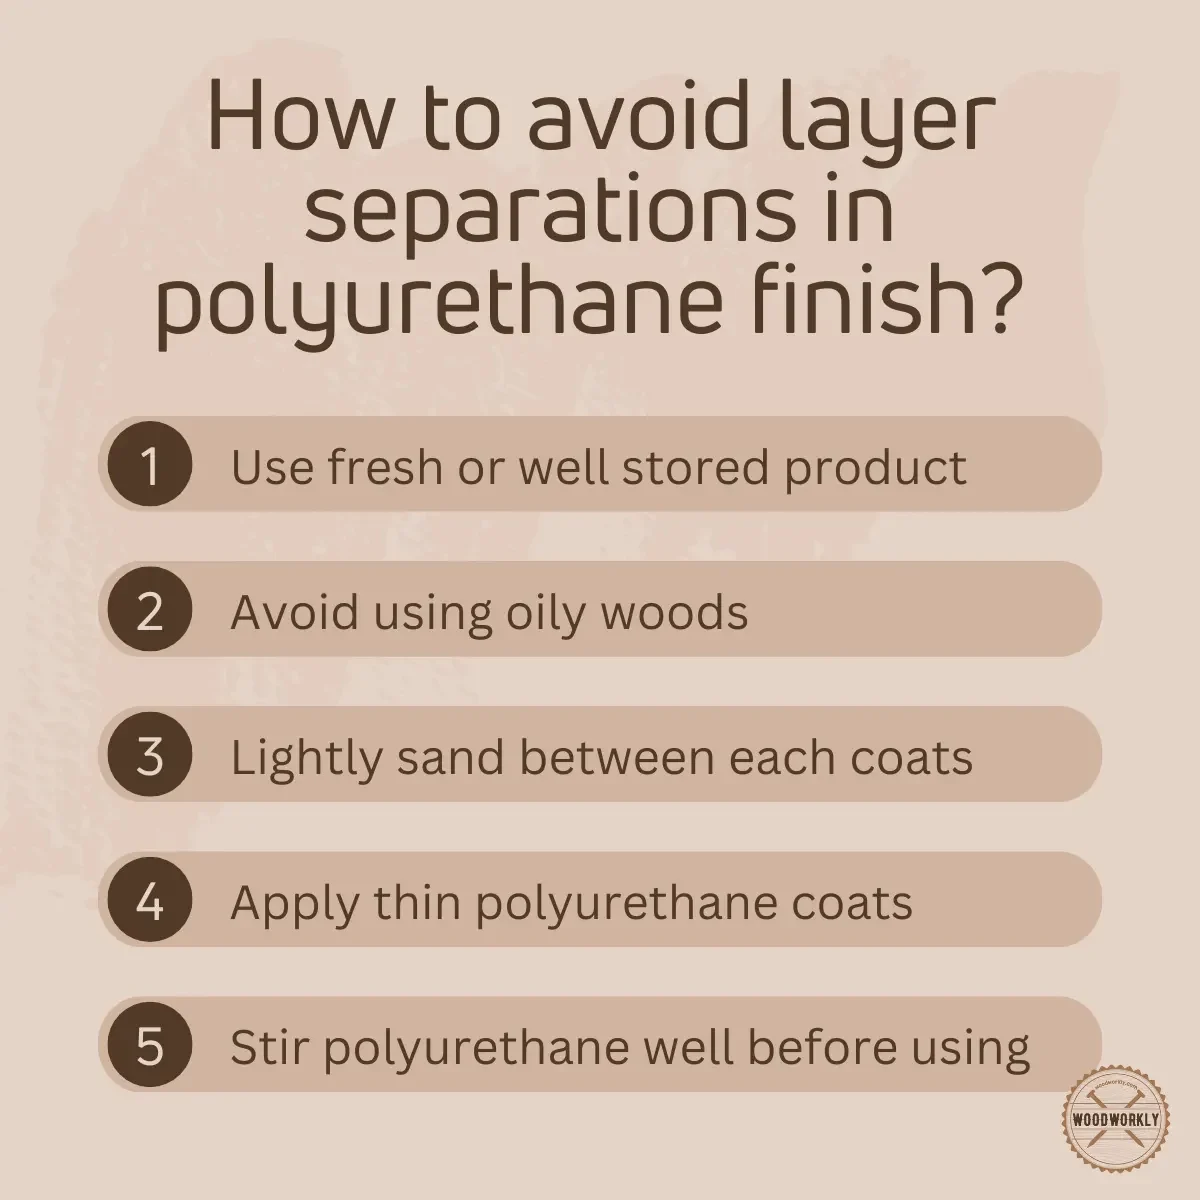 How to avoid layer separations in polyurethane finish